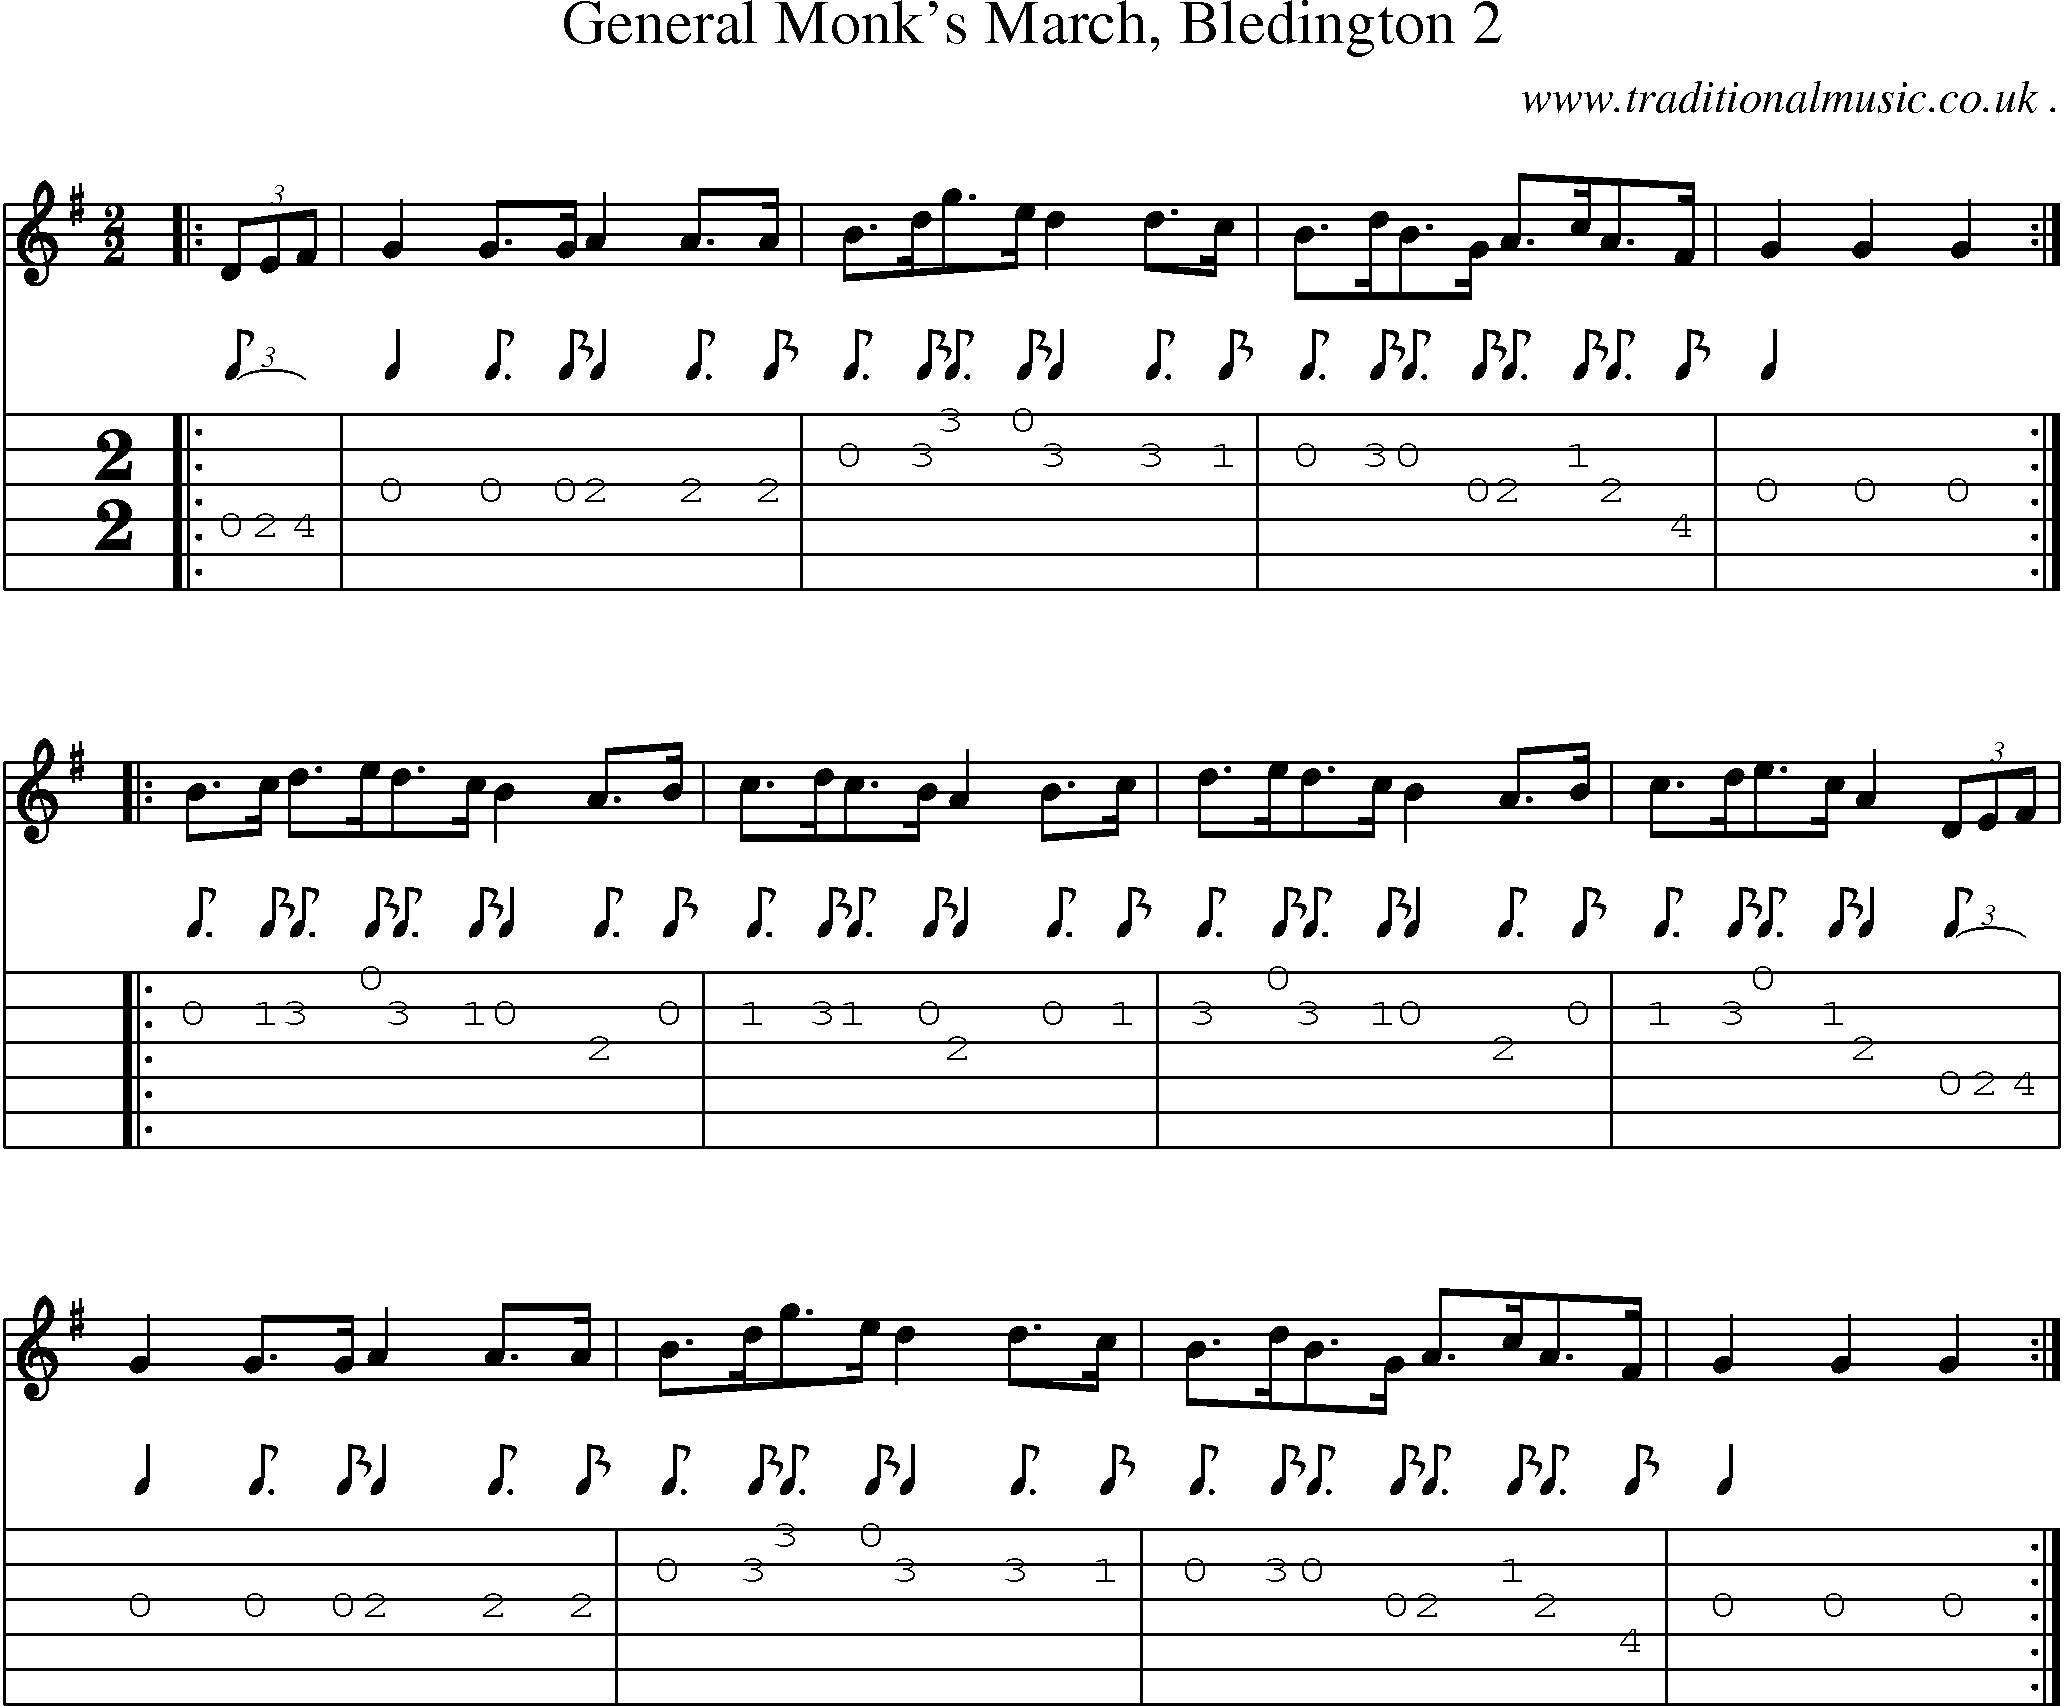 Sheet-Music and Guitar Tabs for General Monks March Bledington 2